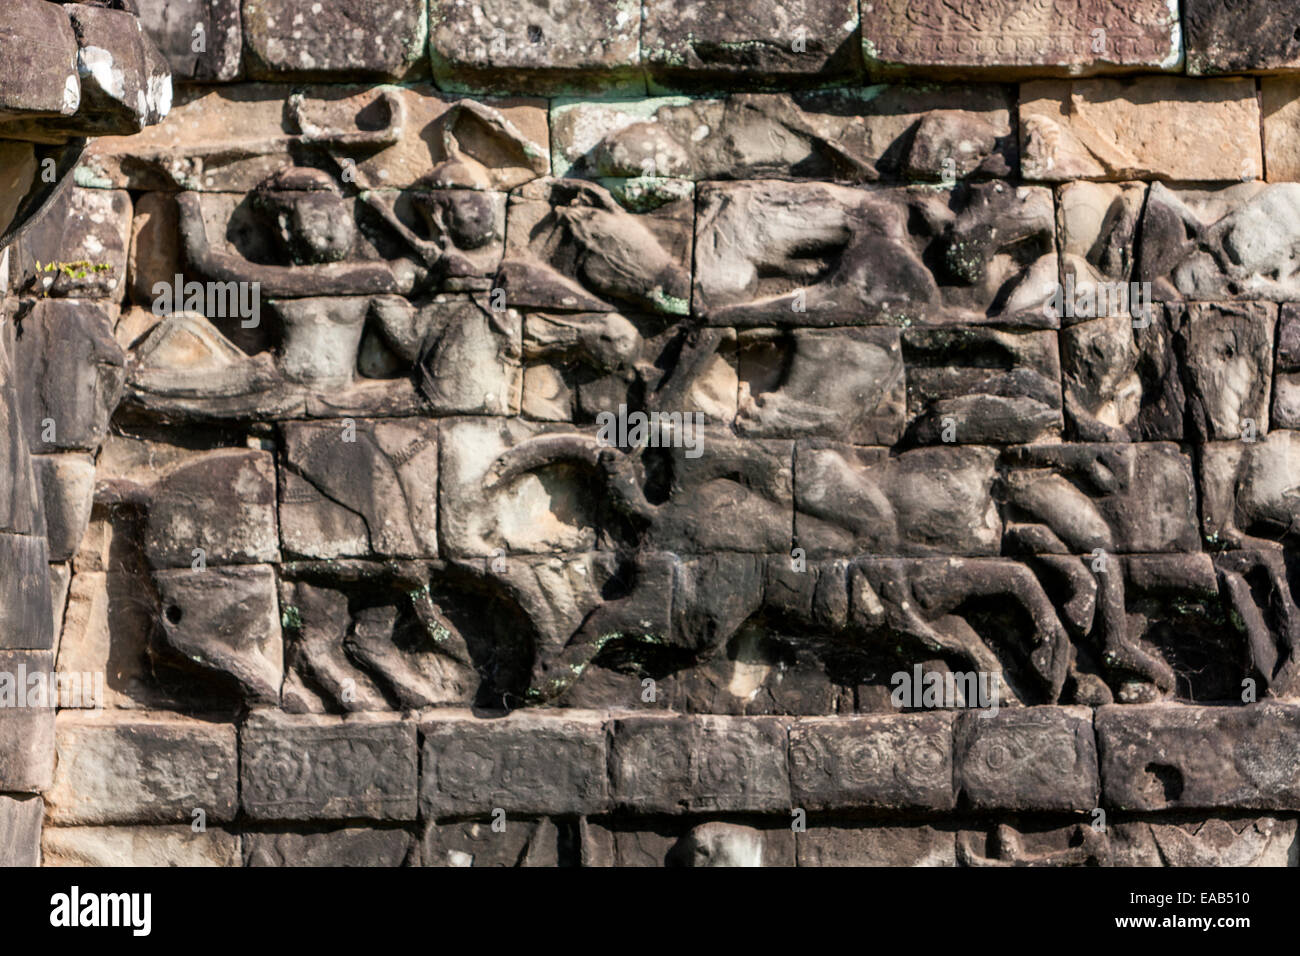 Cambodia, Angkor Thom.  Stone Carving Showing Soldiers and Horses in Battle. Stock Photo